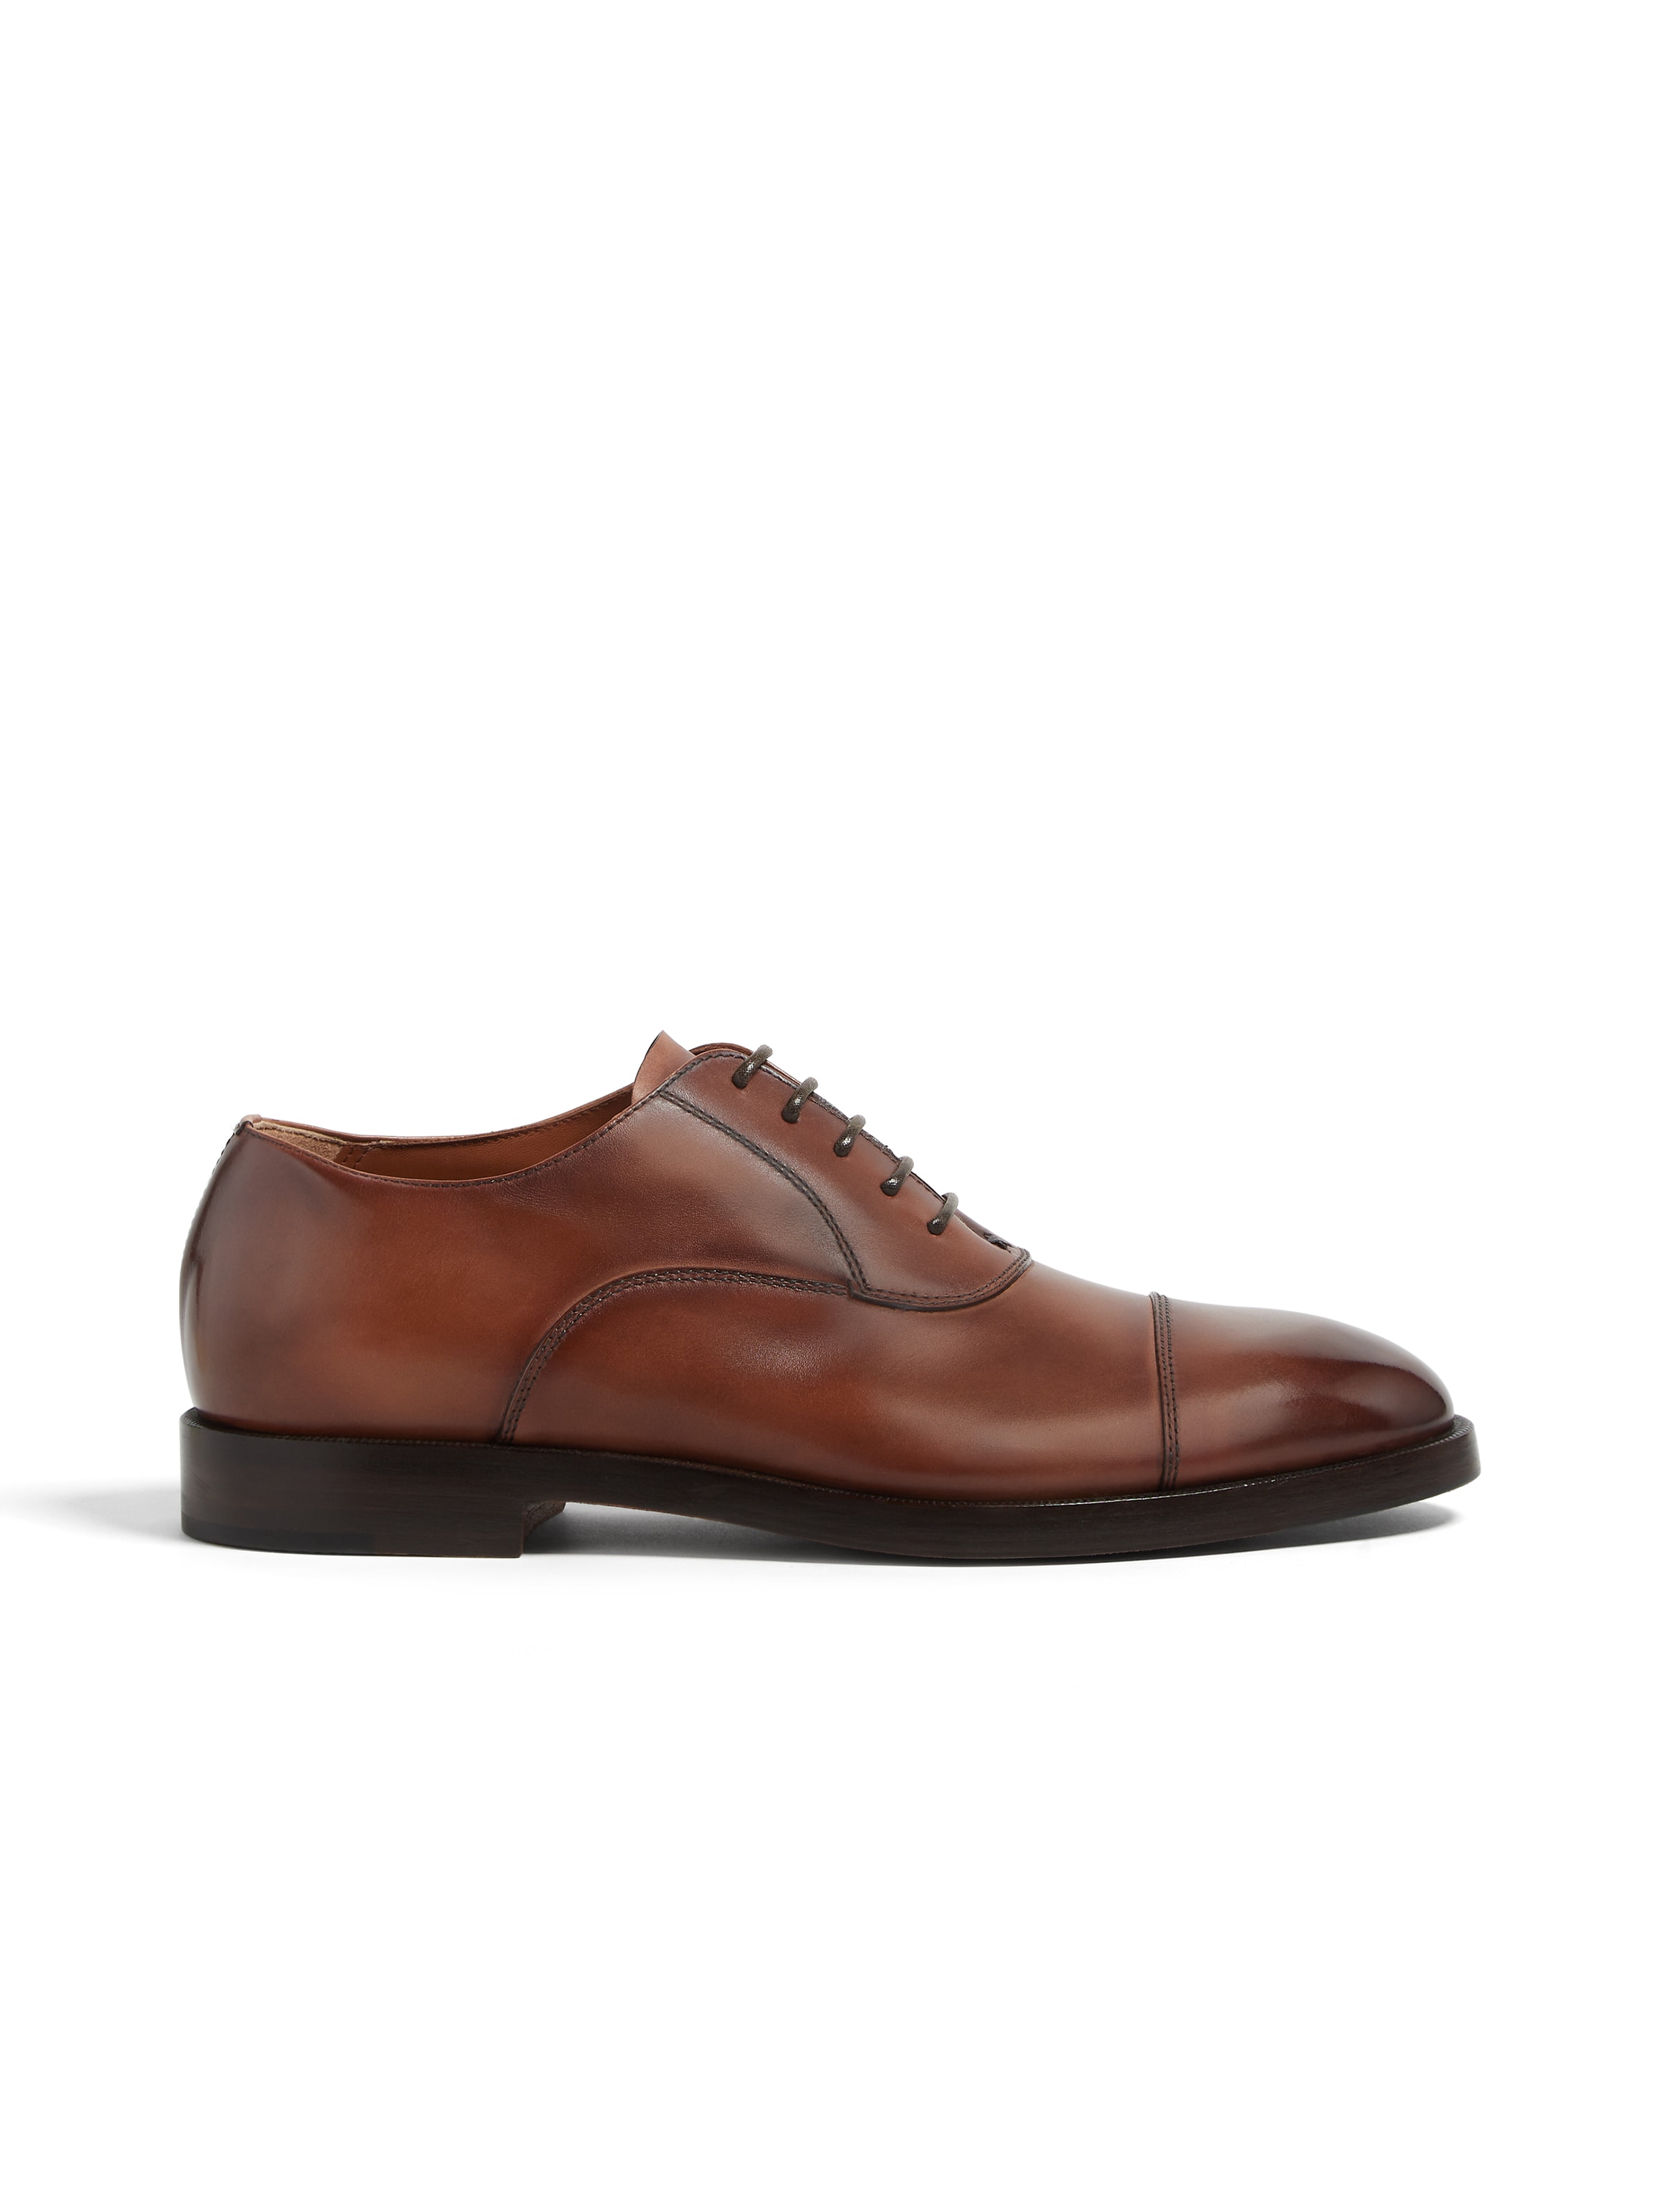 Shop Zegna Light Brown Leather Torino Oxford Shoes